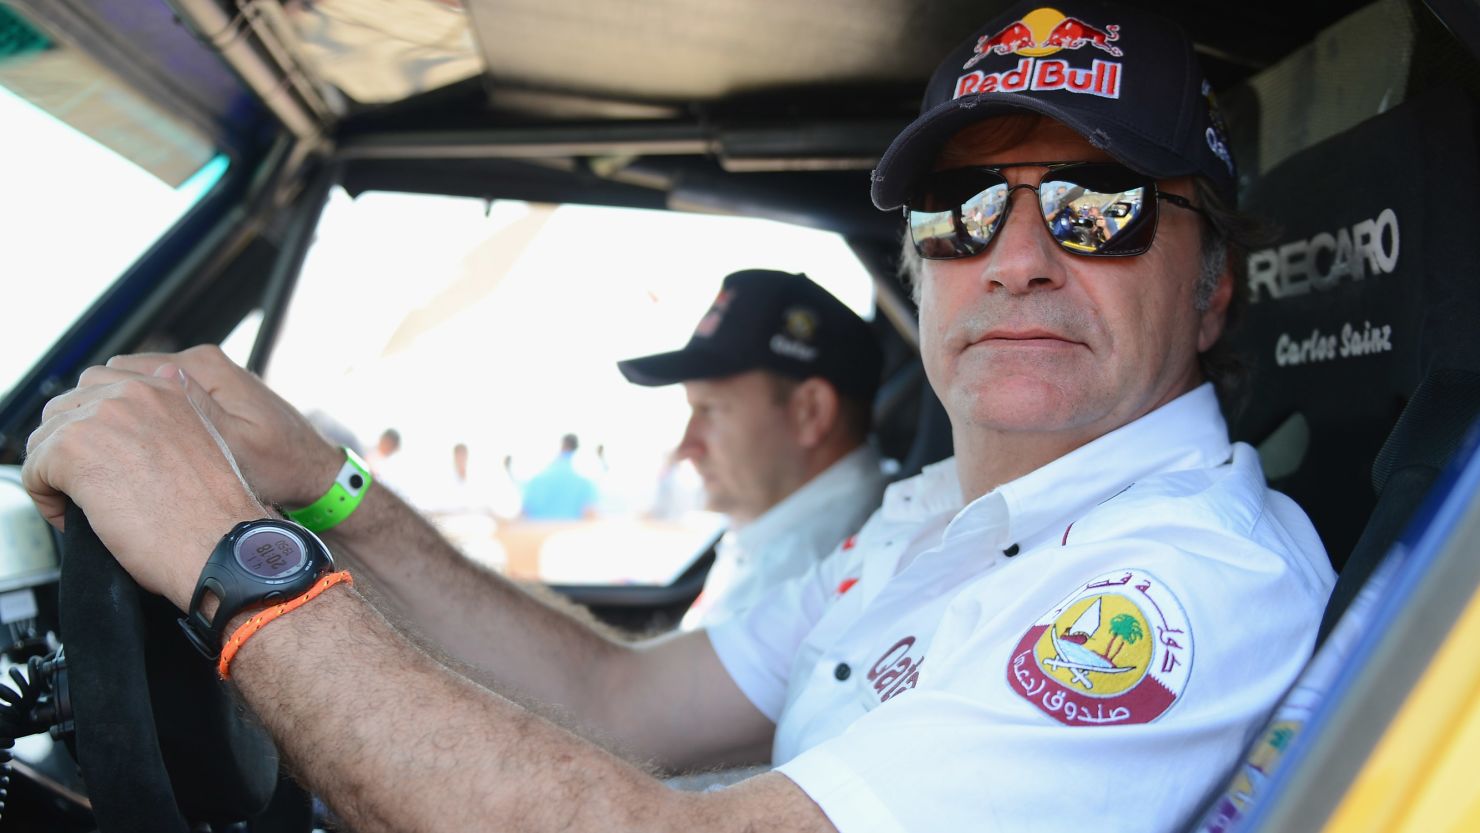 Carlos Sainz of Spain claimed the first special stage of the 2013 Dakar Rally in Peru.